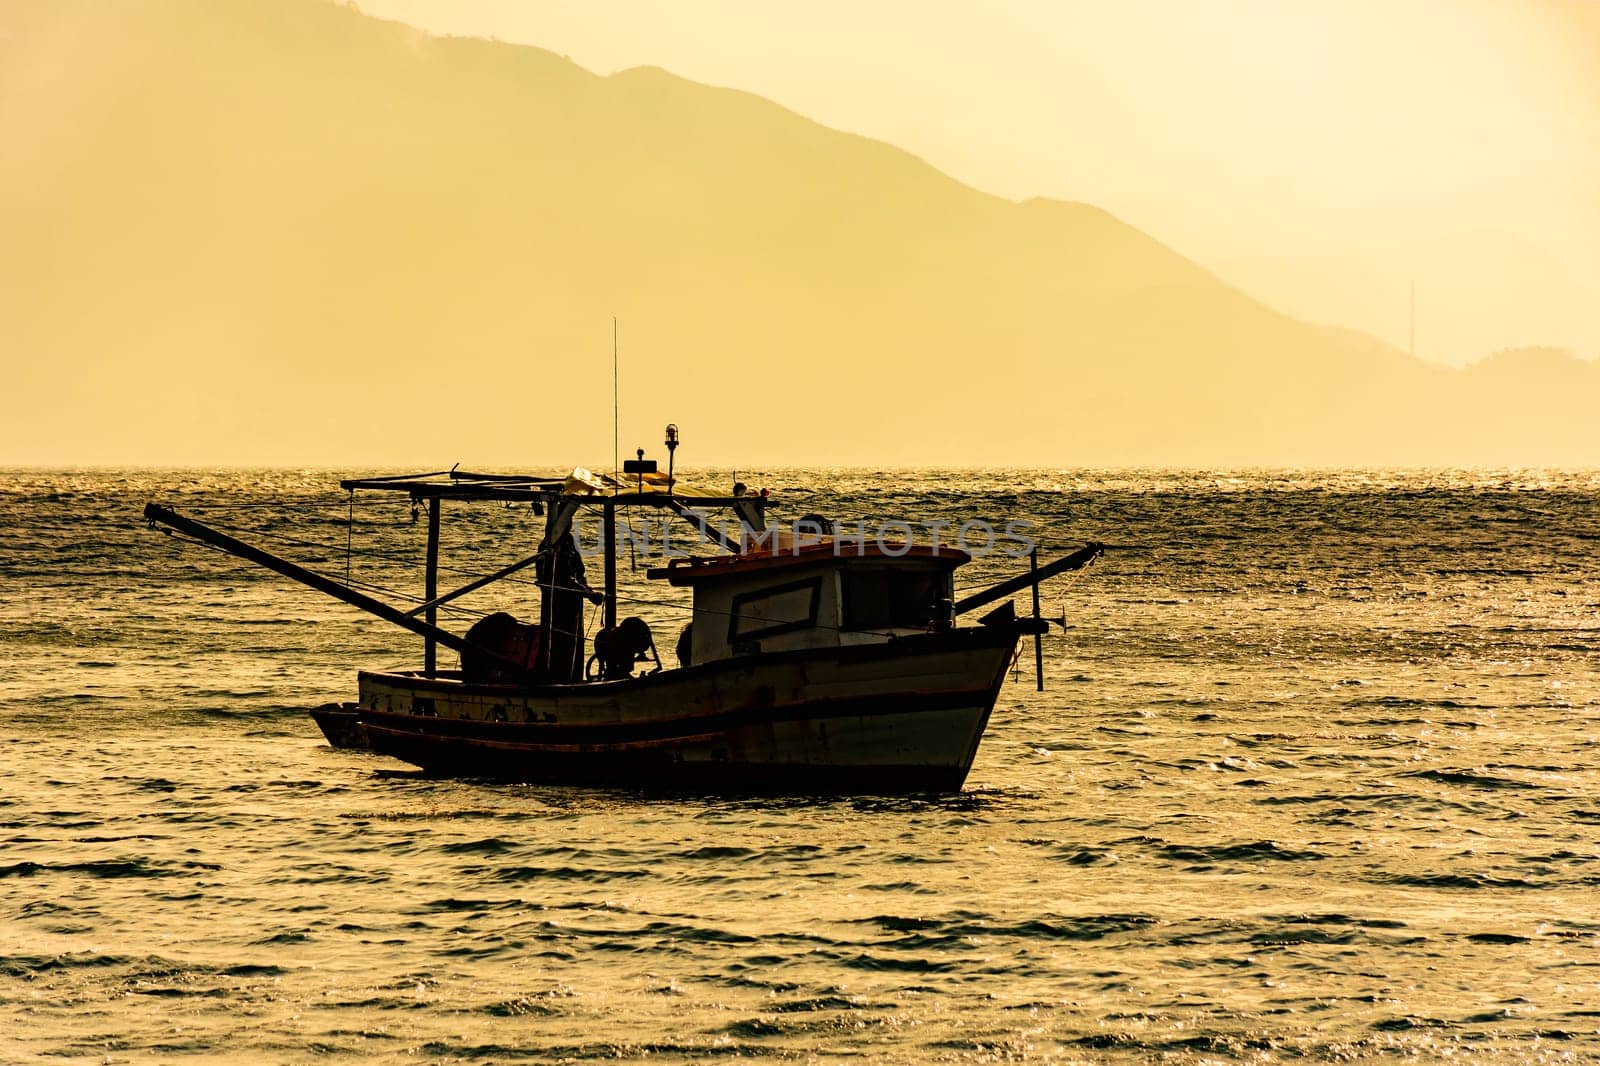 Wooden trawler used for fishing by Fred_Pinheiro